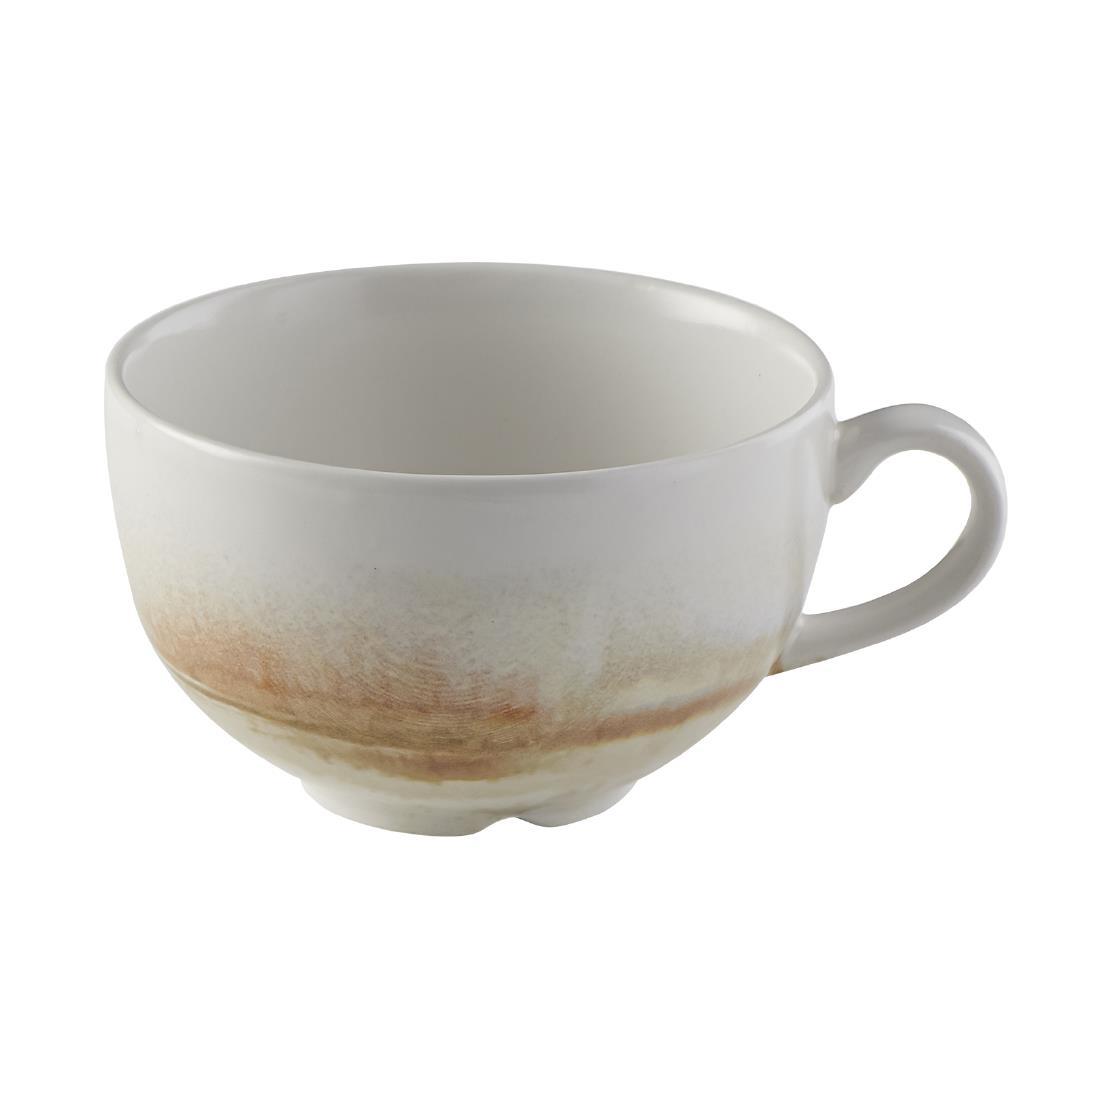 Dudson Makers Finca Sandstone Cappuccino Cup 340ml (Pack of 12) - FS783  - 1